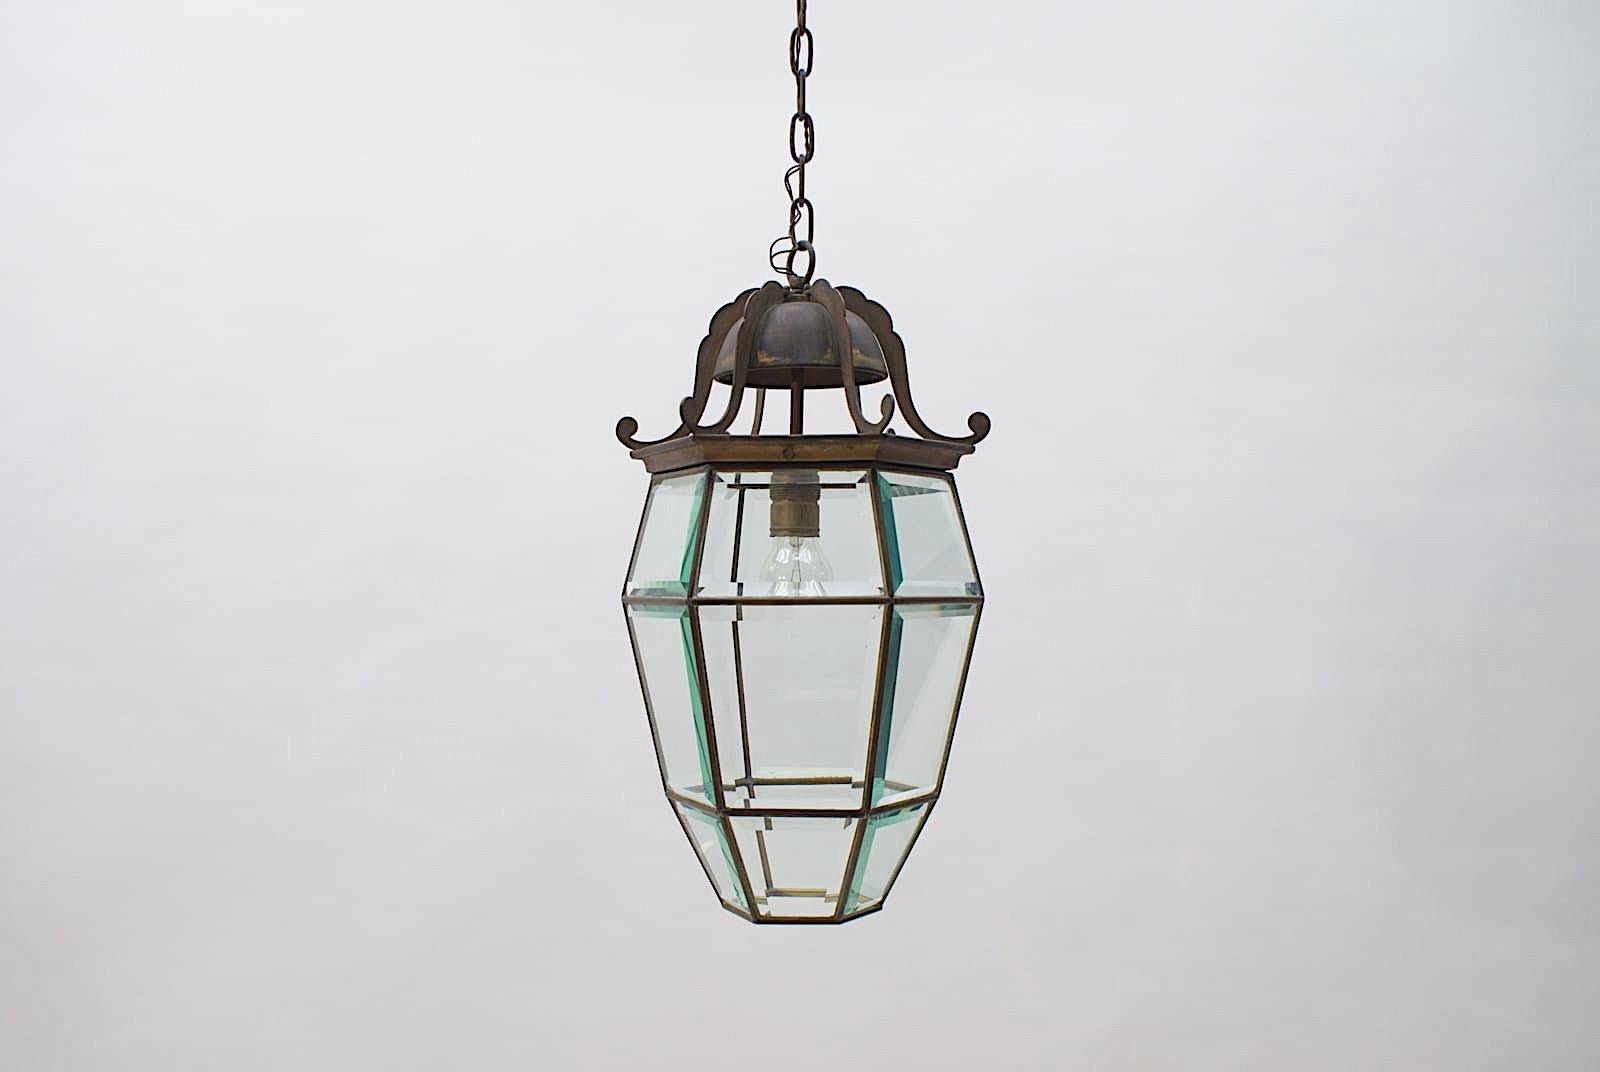 Lovely Adolf Loos Lobmeyr Style Light Cut Glass and Brass, Austria 1930s

Diameter: 11.03 in (28 cm)
Height: 36.62 in (93 cm)

Amazing Adolf Loos / Josef Hoffmann Style Vienna Secession Pendant Lamp, Austria, circa 1915-1930. Antique patinated brass